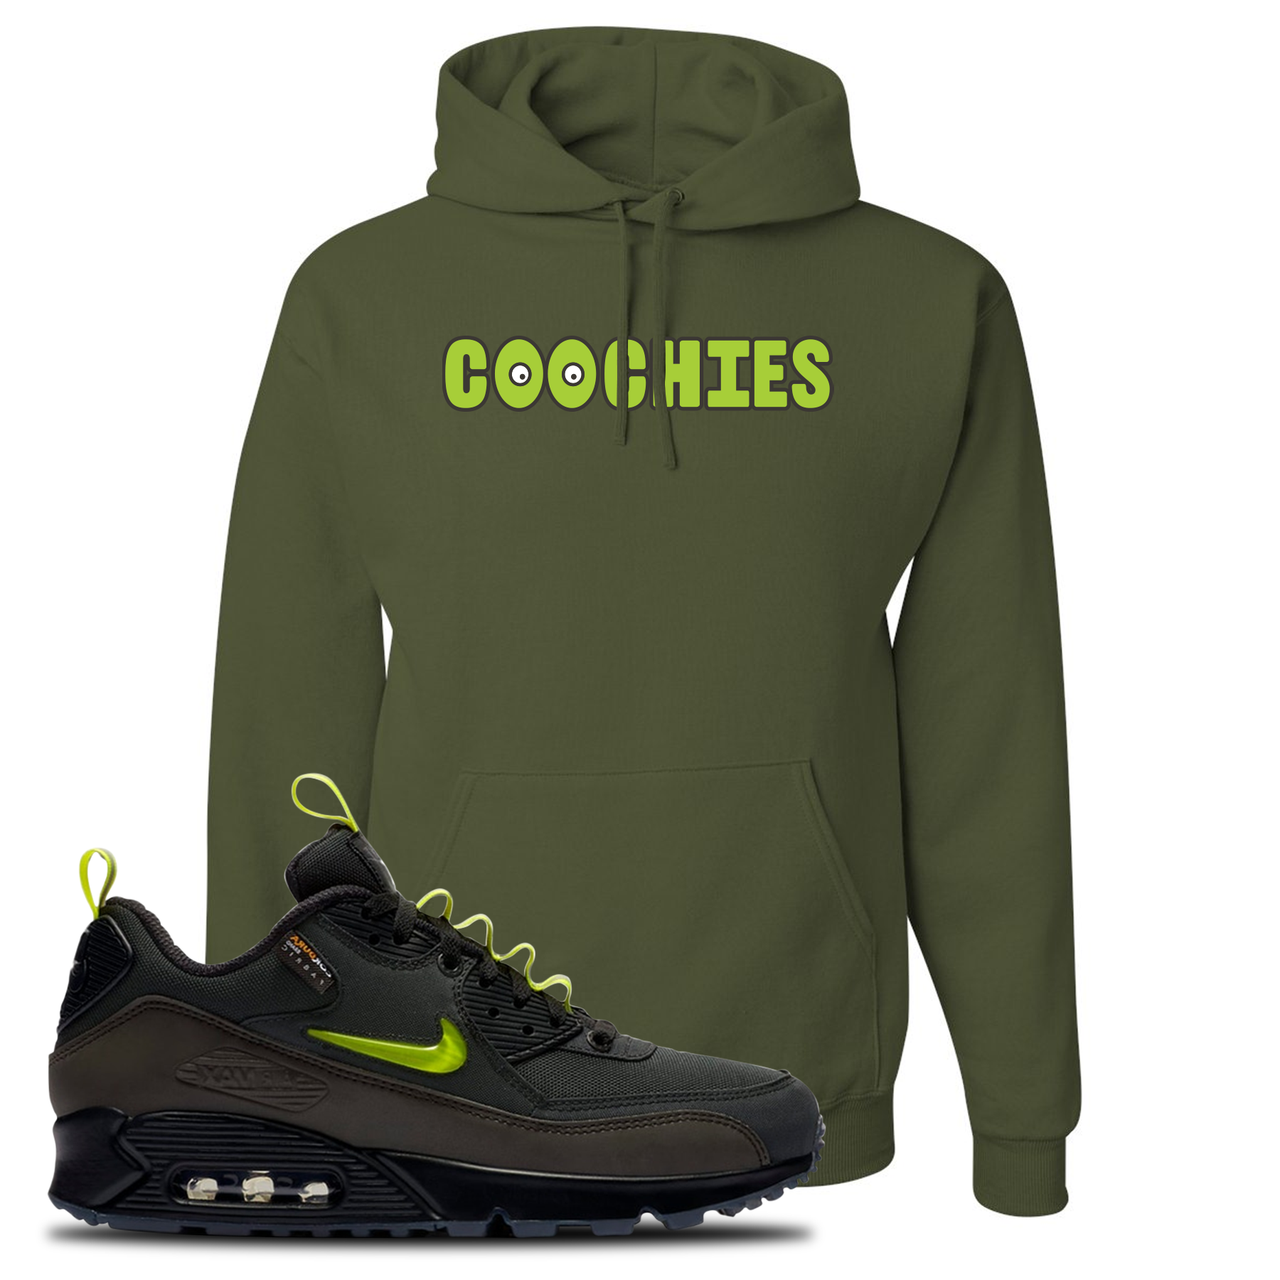 The Basement X Air Max 90 Manchester Coochies Military Green Sneaker Hook Up Pullover Hoodie